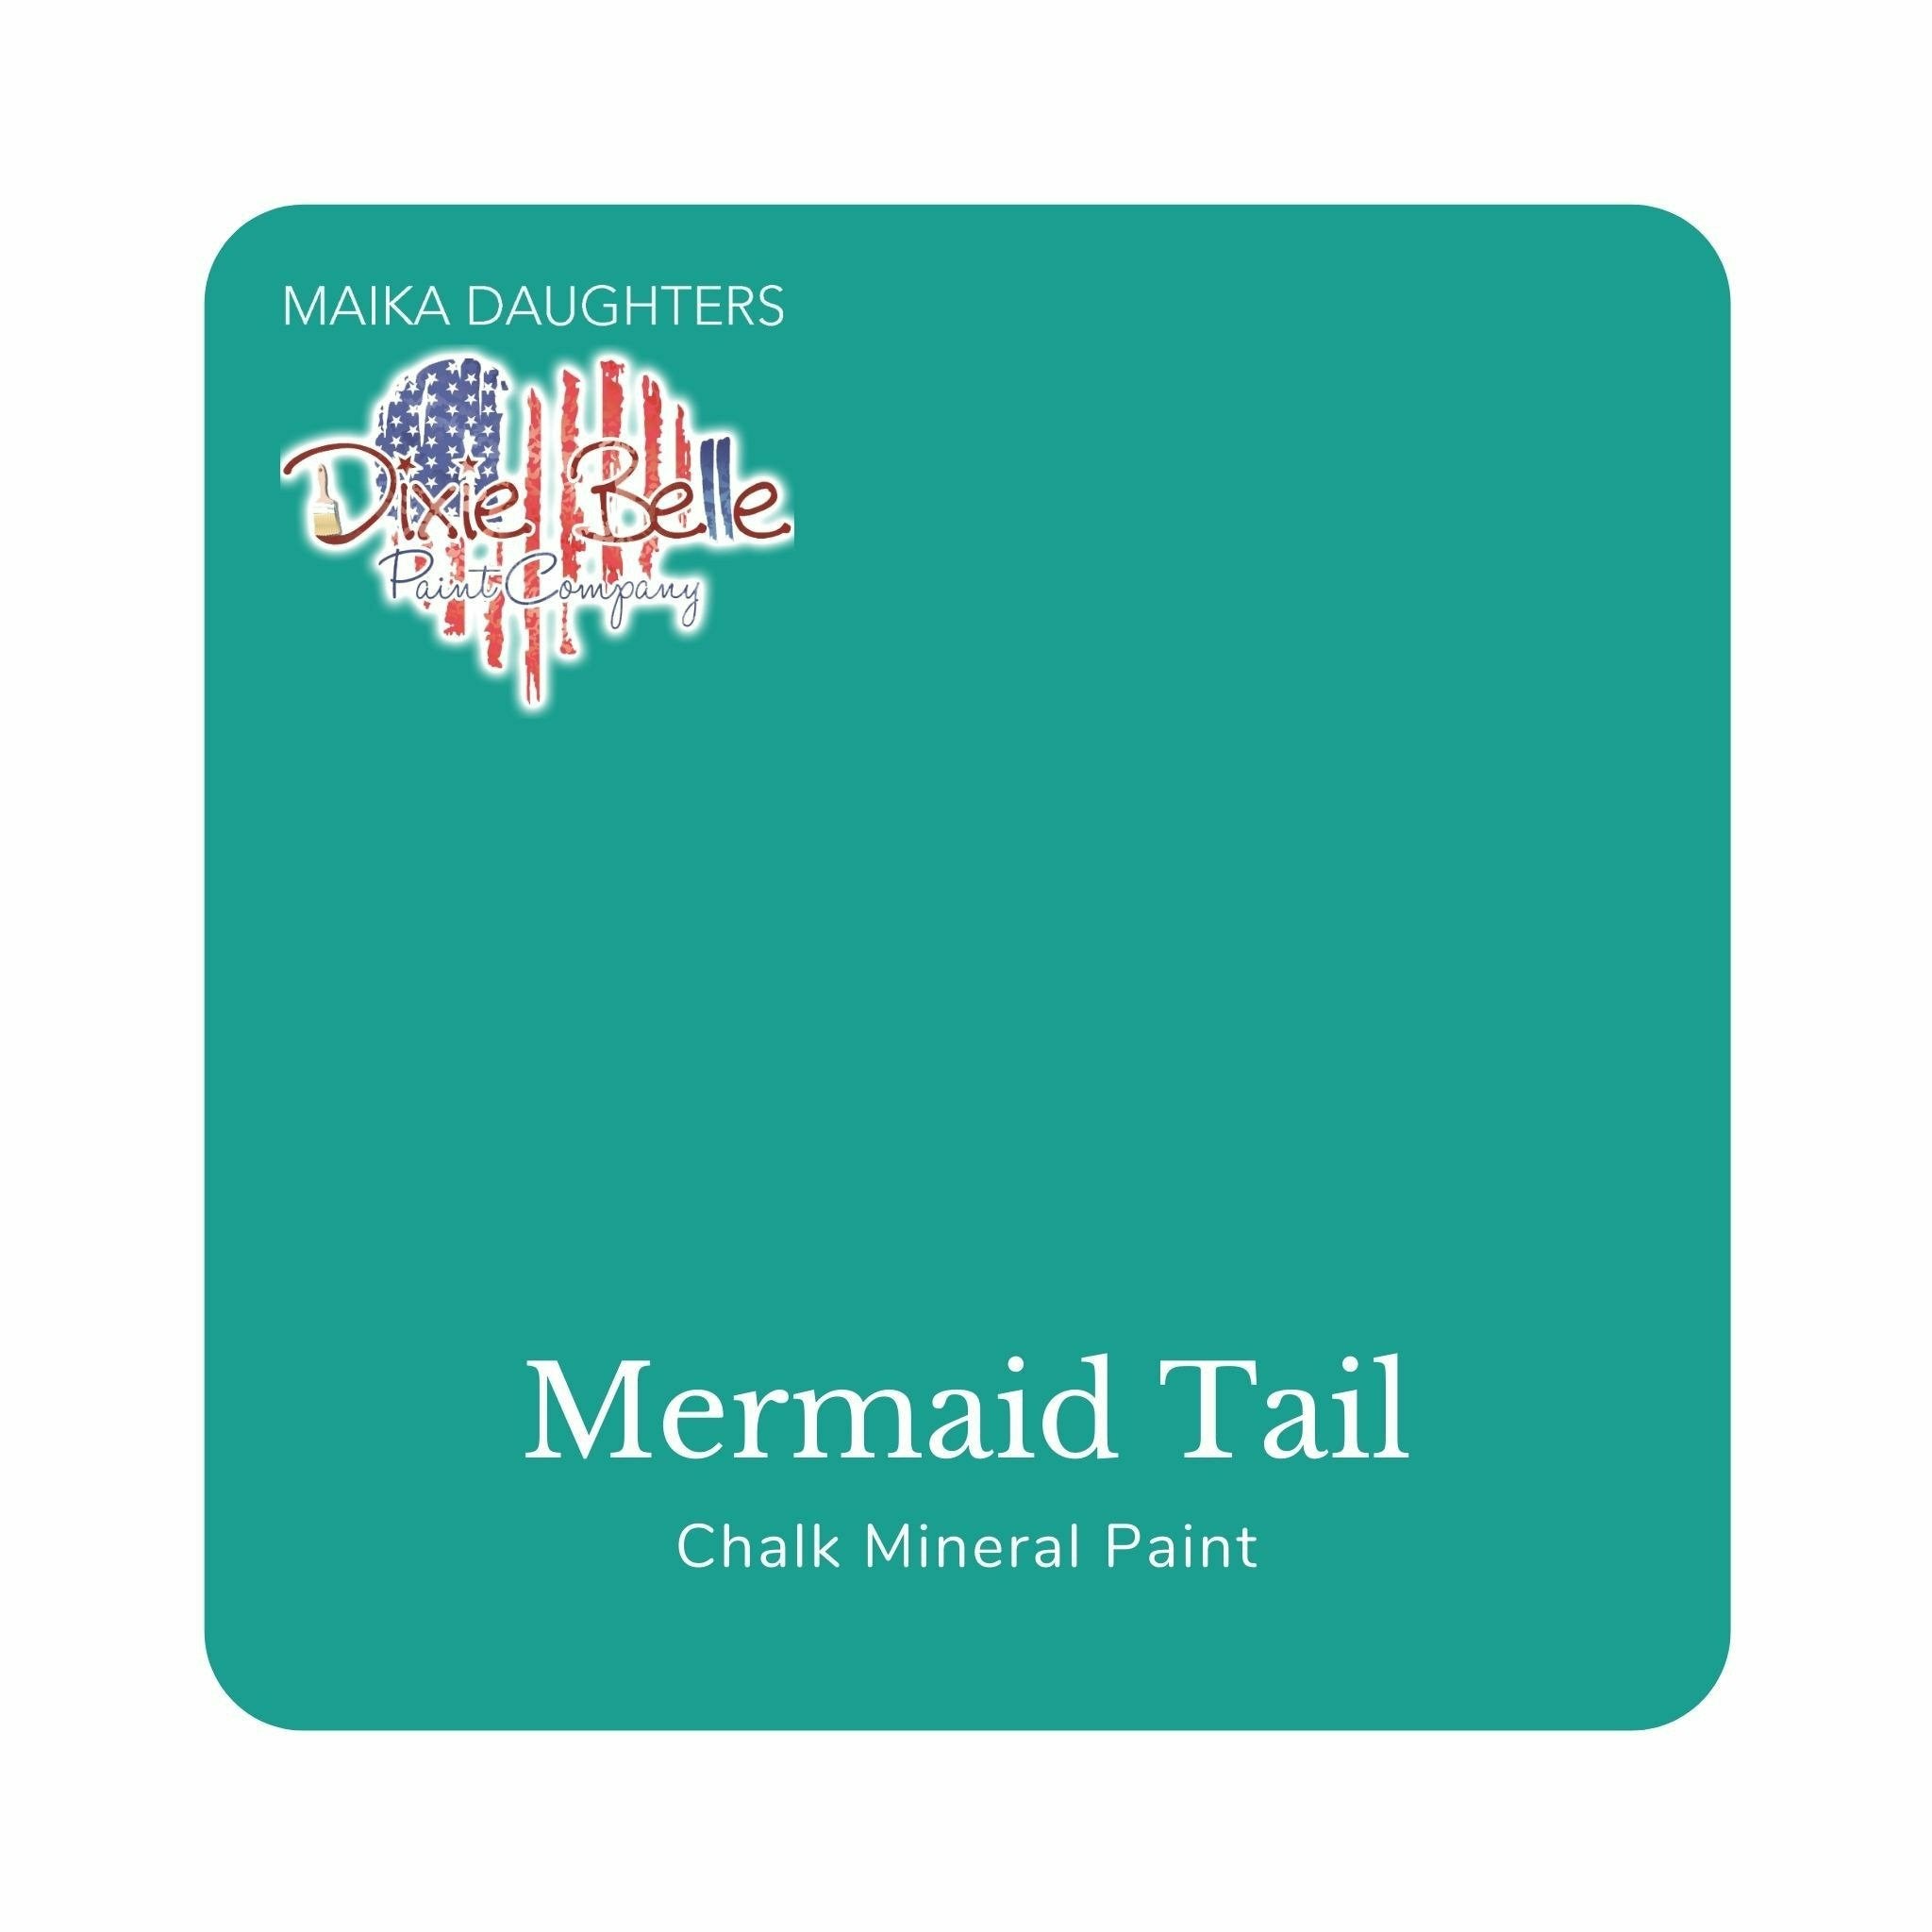 A square swatch card of Dixie Belle Paint Company’s Mermaid Tail Chalk Mineral Paint is against a white background. This color is a turquoise blue.